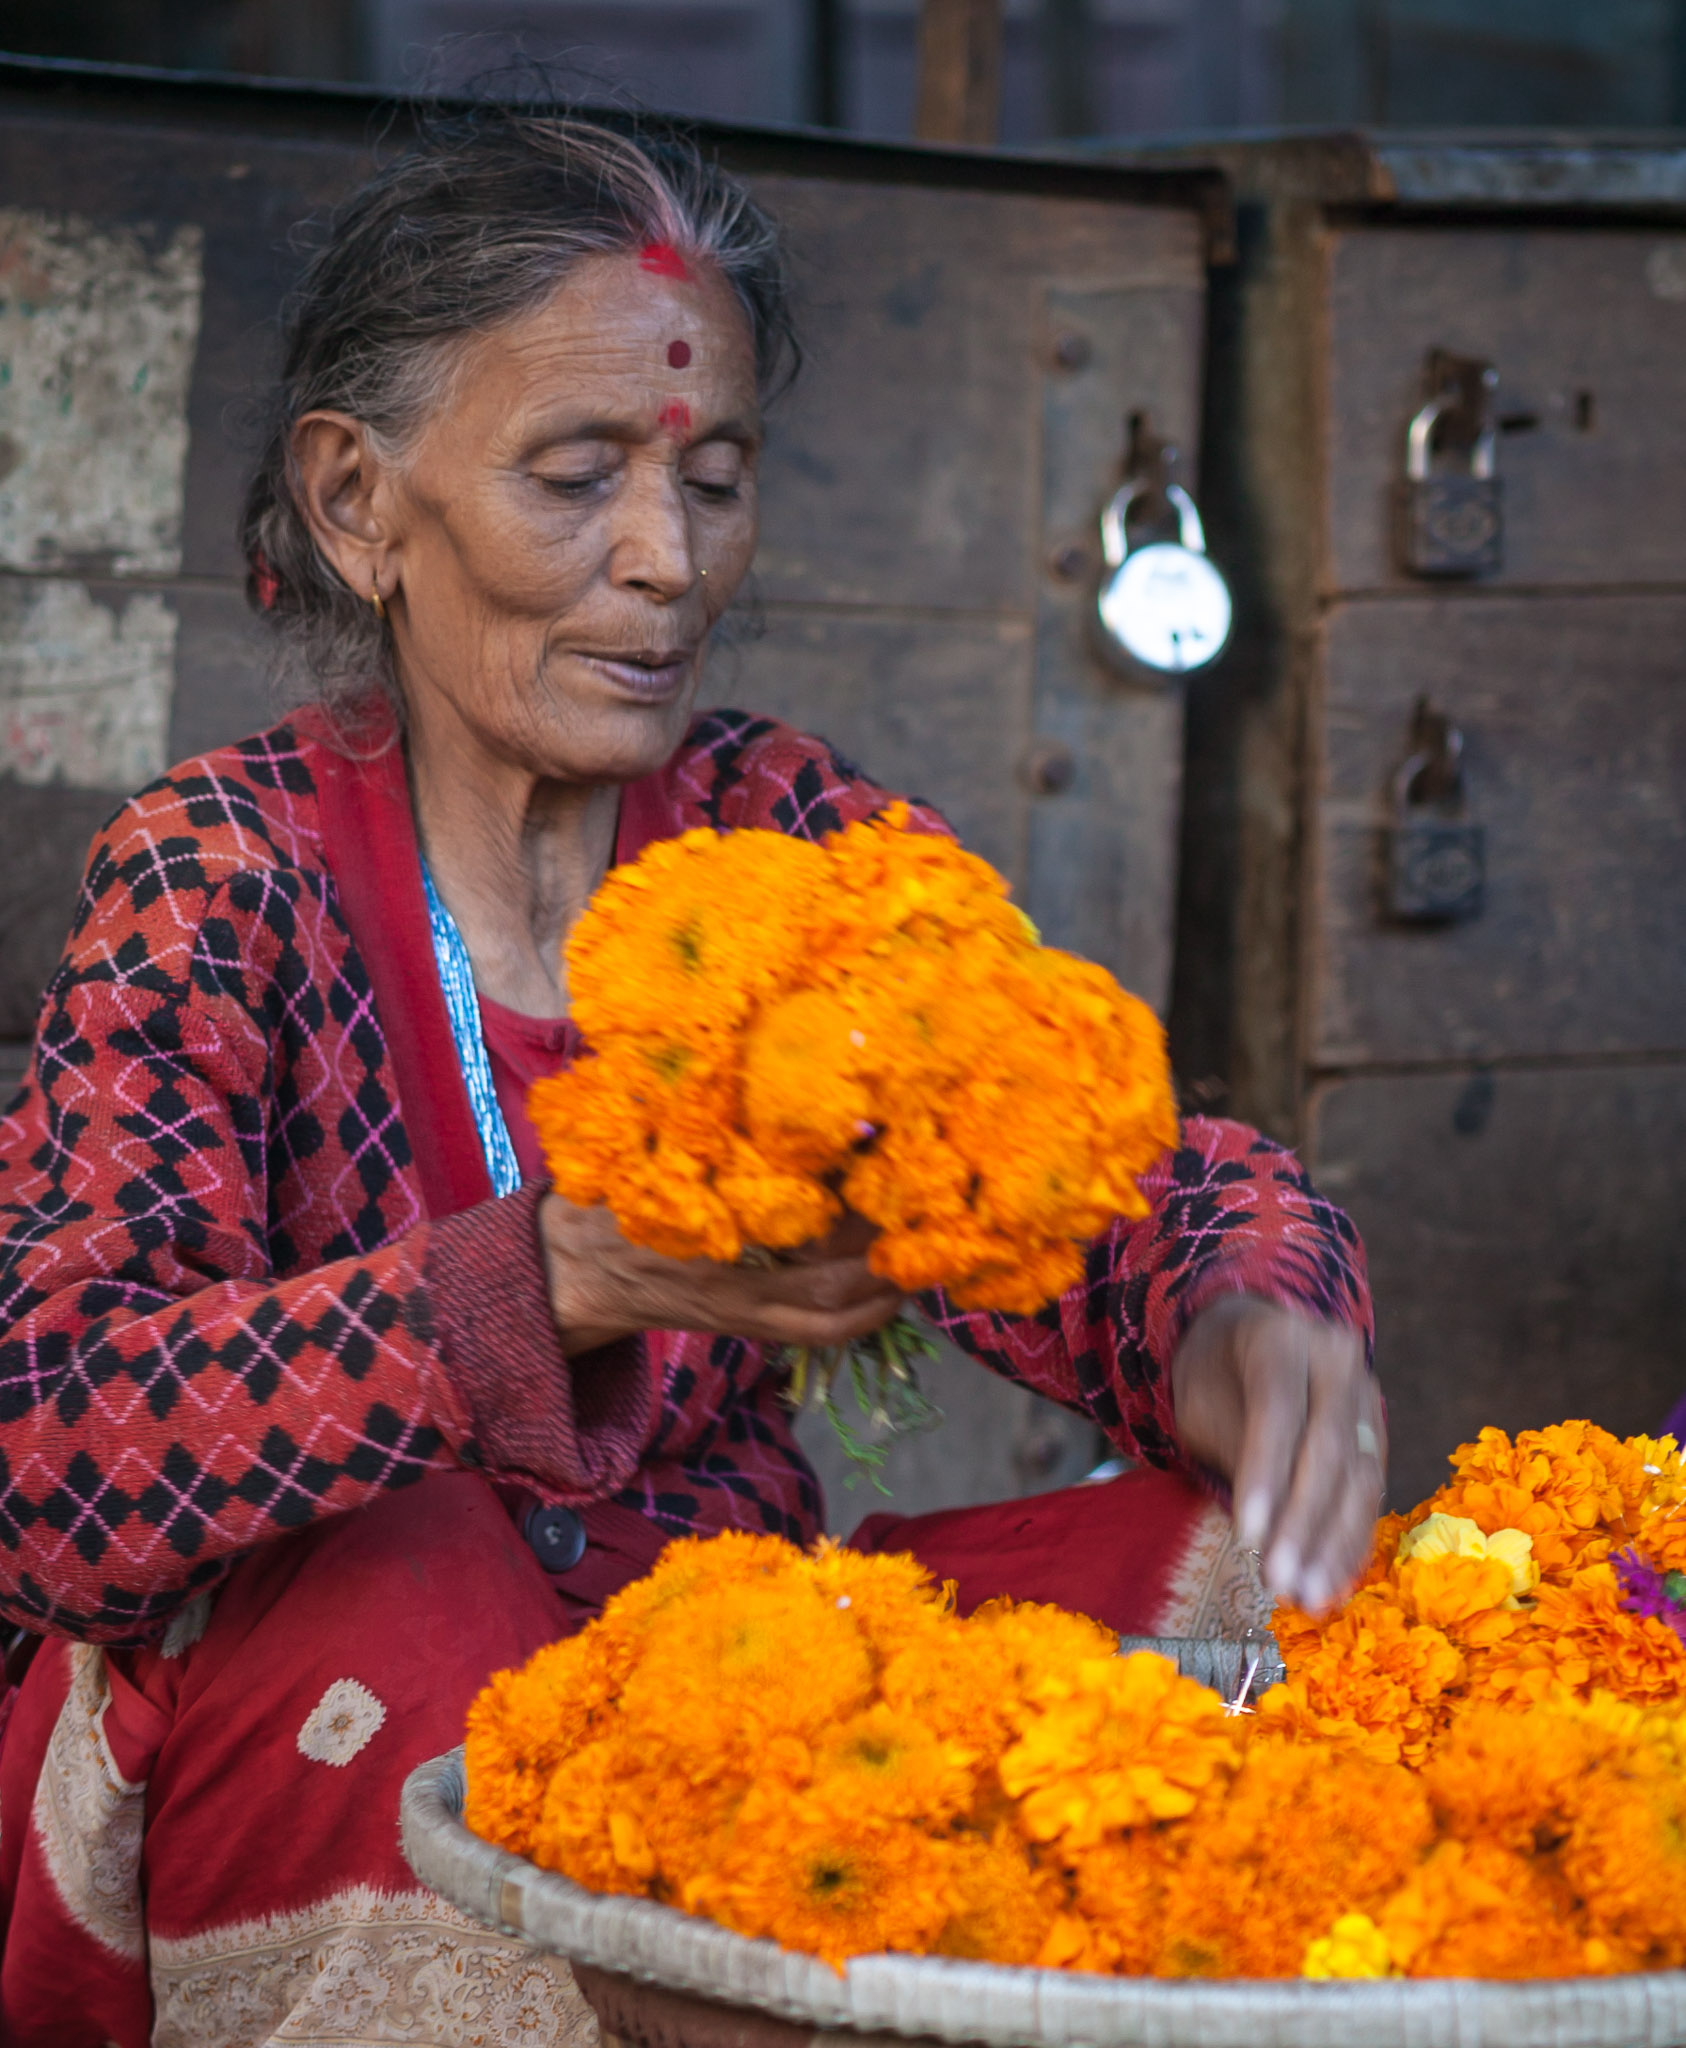 Marigolds are heavily used in Diwali celebration